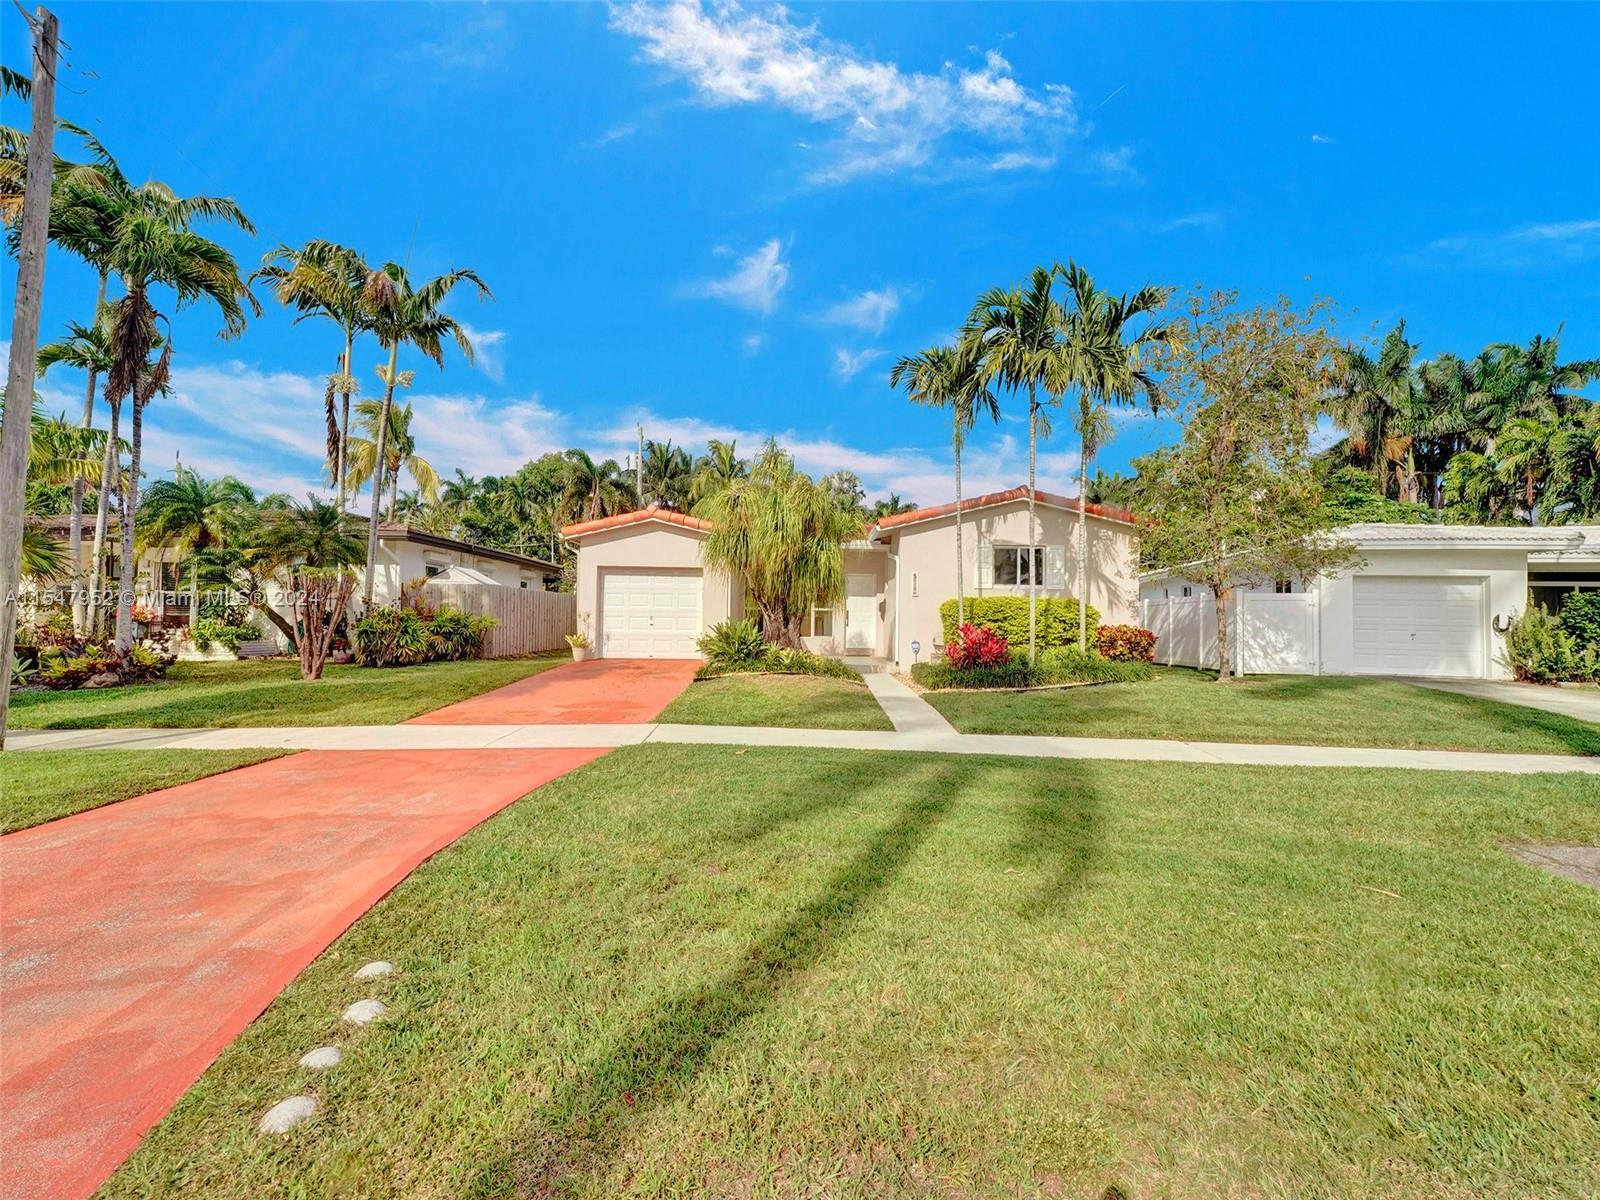 Photo of 915 N 14th Ave in Hollywood, FL